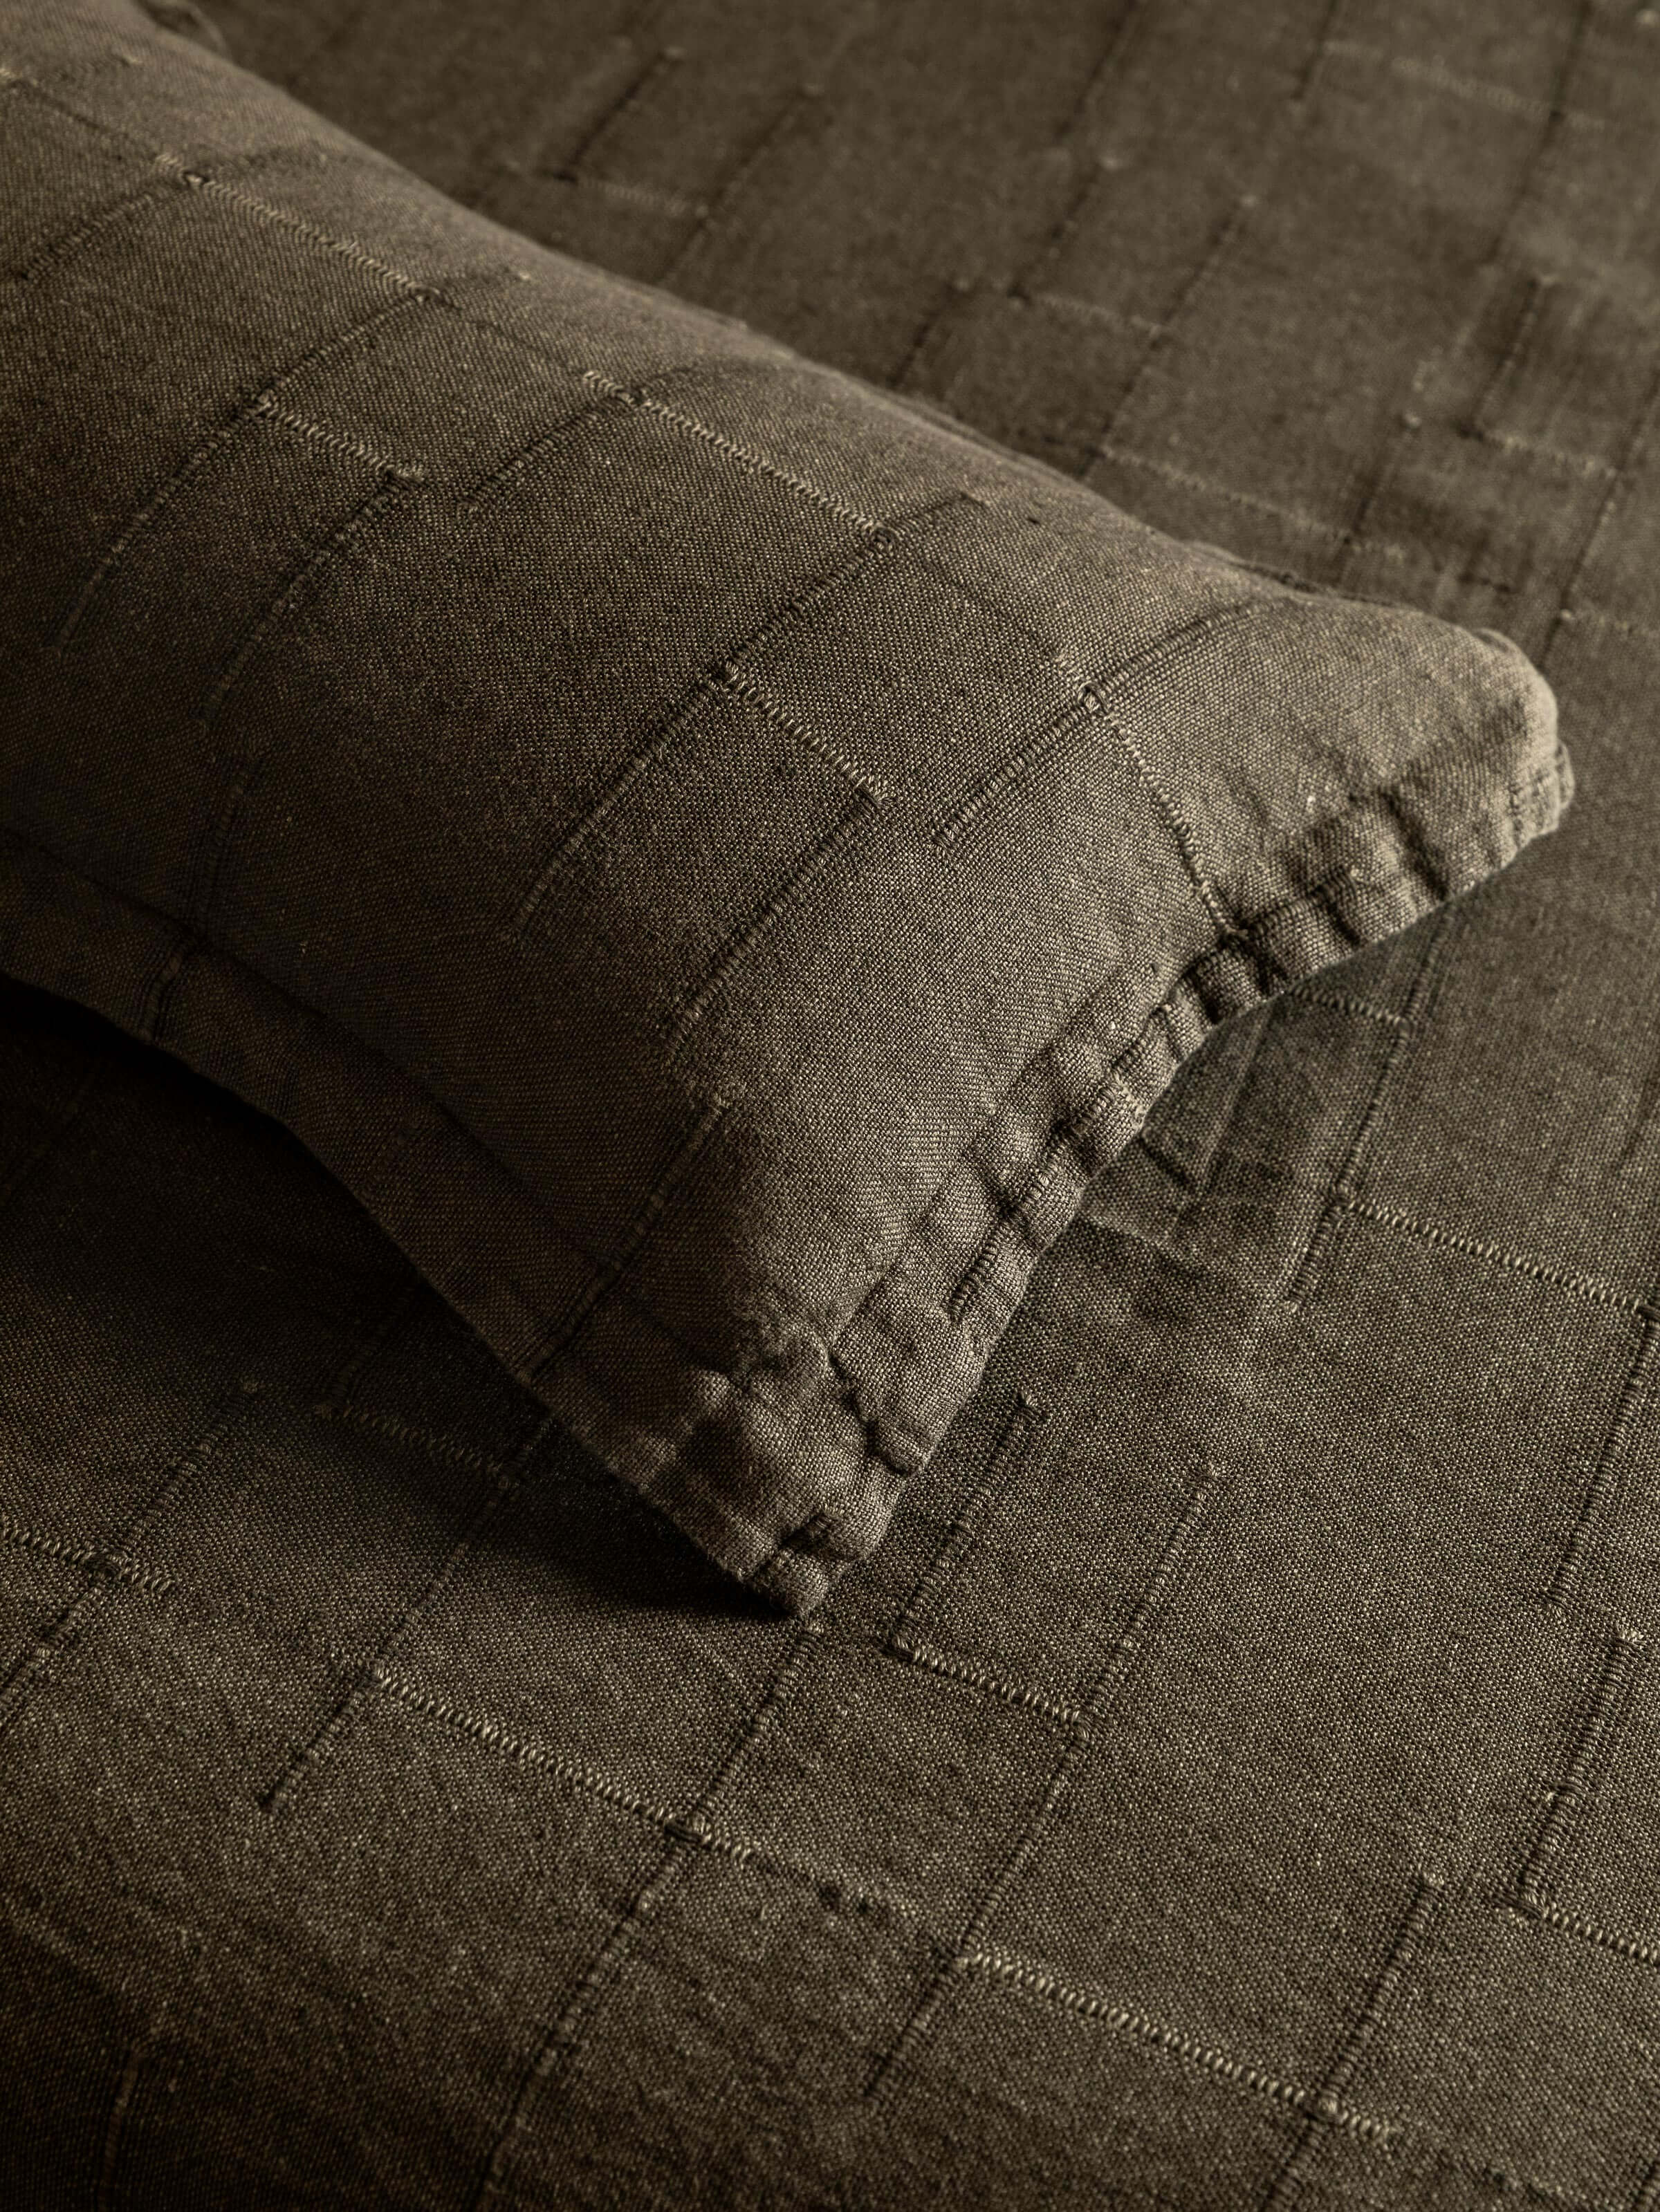 Palermo Olive French Linen Bedcover